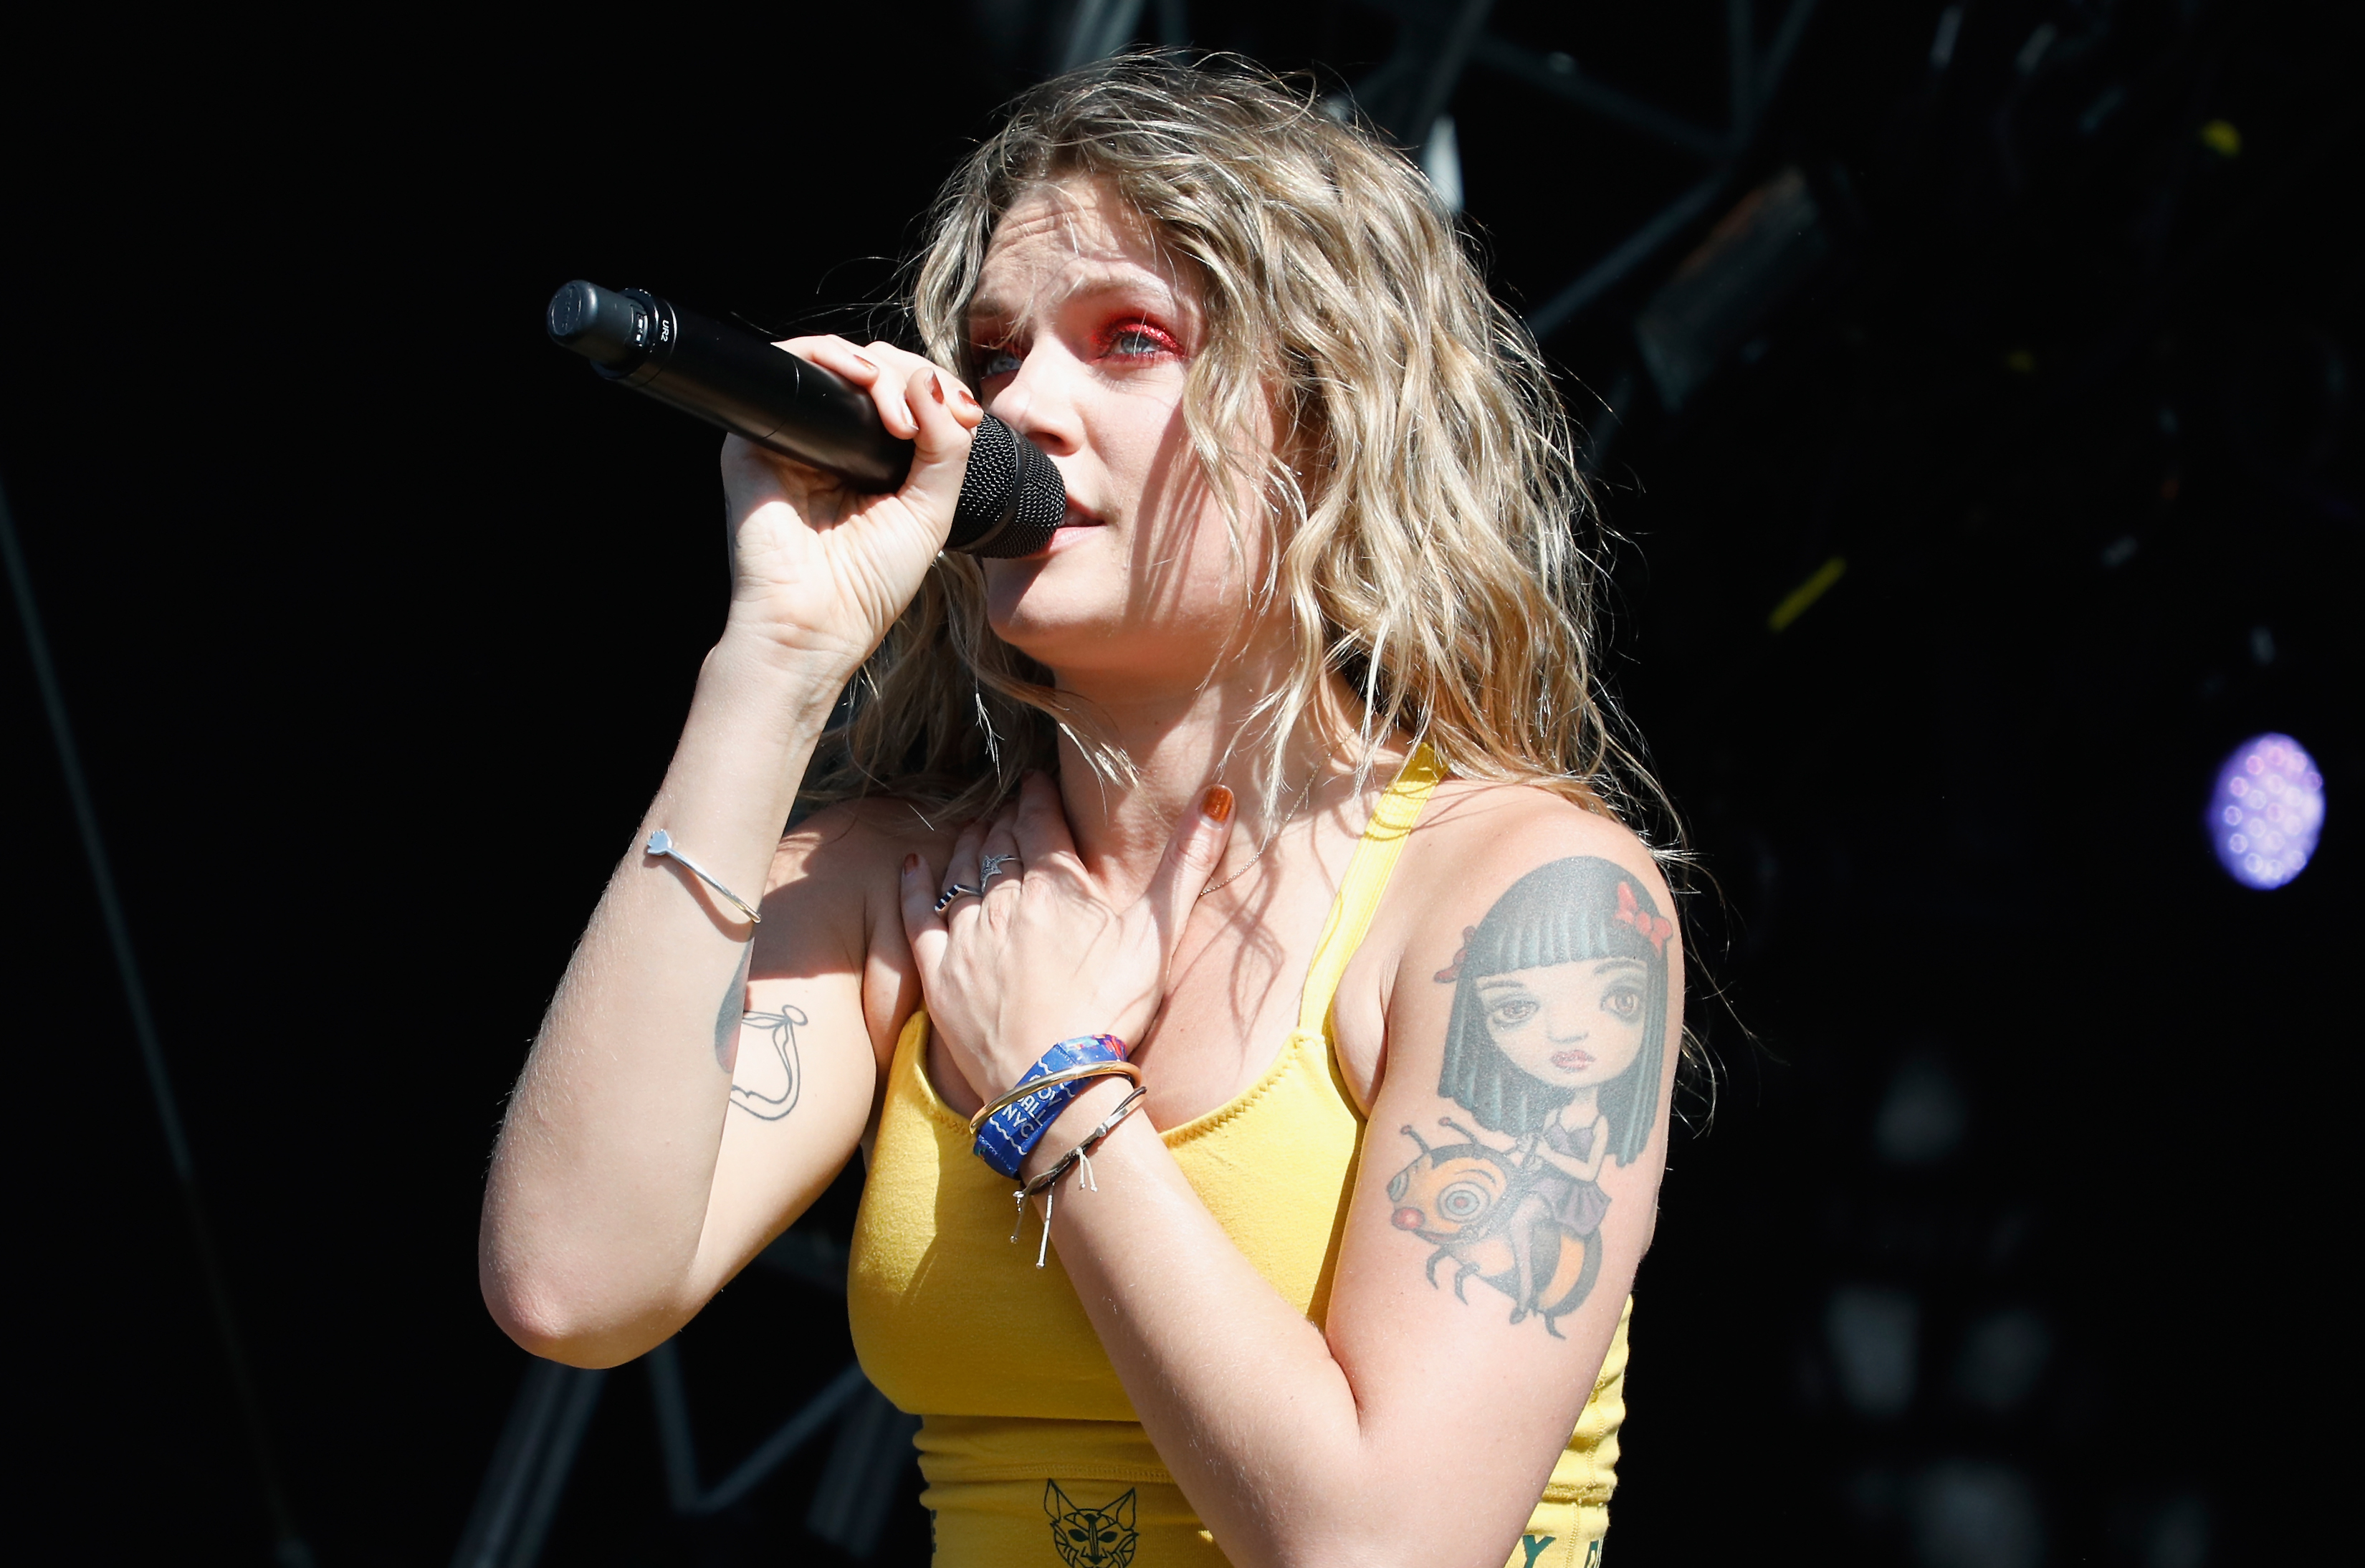 Singer Tove Lo performs during 2017 Governors Ball Music Festival at Randall's Island with red eyeshadow